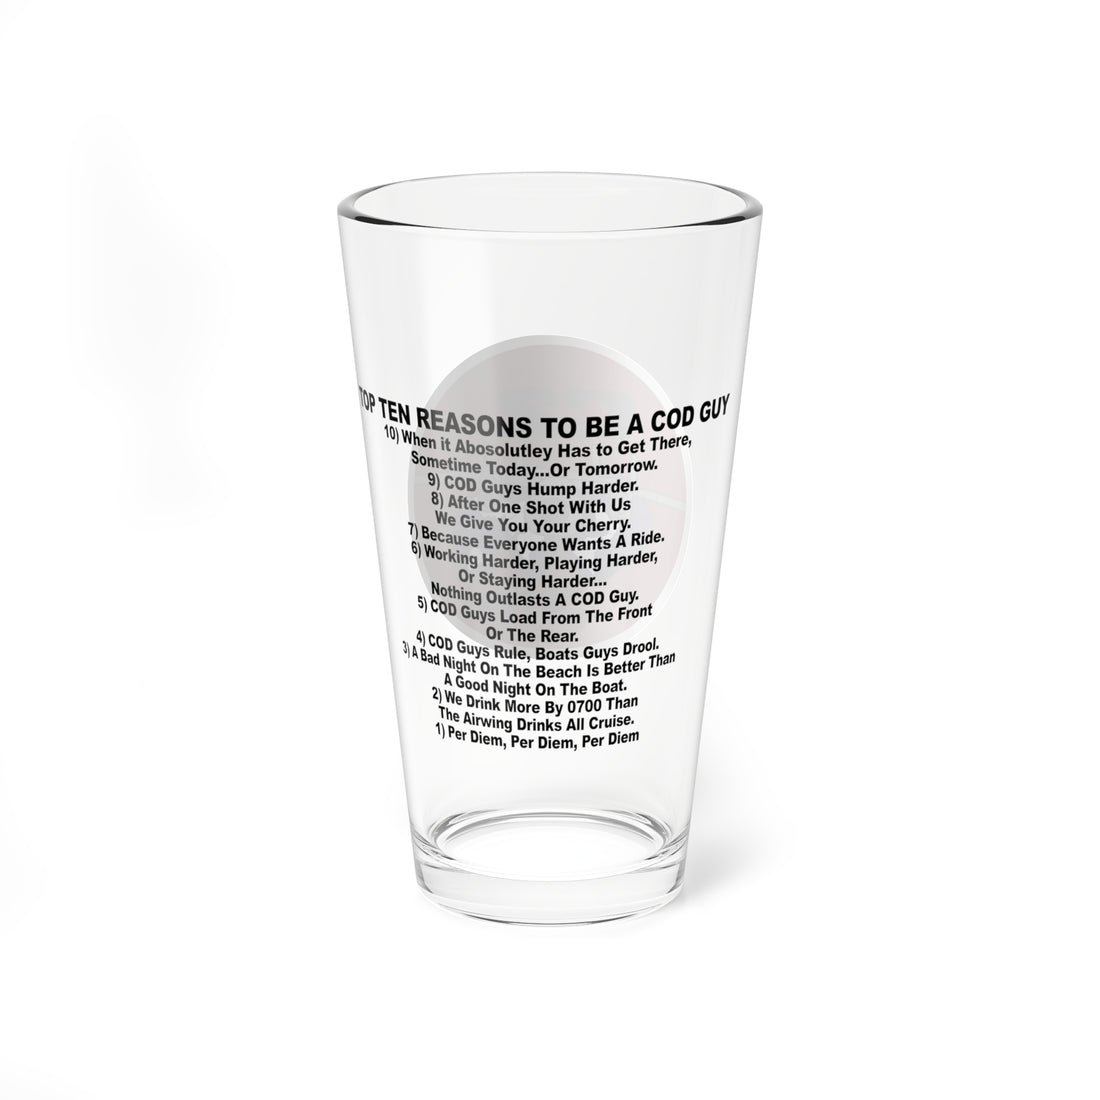 C-2 "Greyhound" Top Ten Reasons Pint Glass, Navy Carrier Onboard Delivery Aircraft with Reasons to be a COD Guy